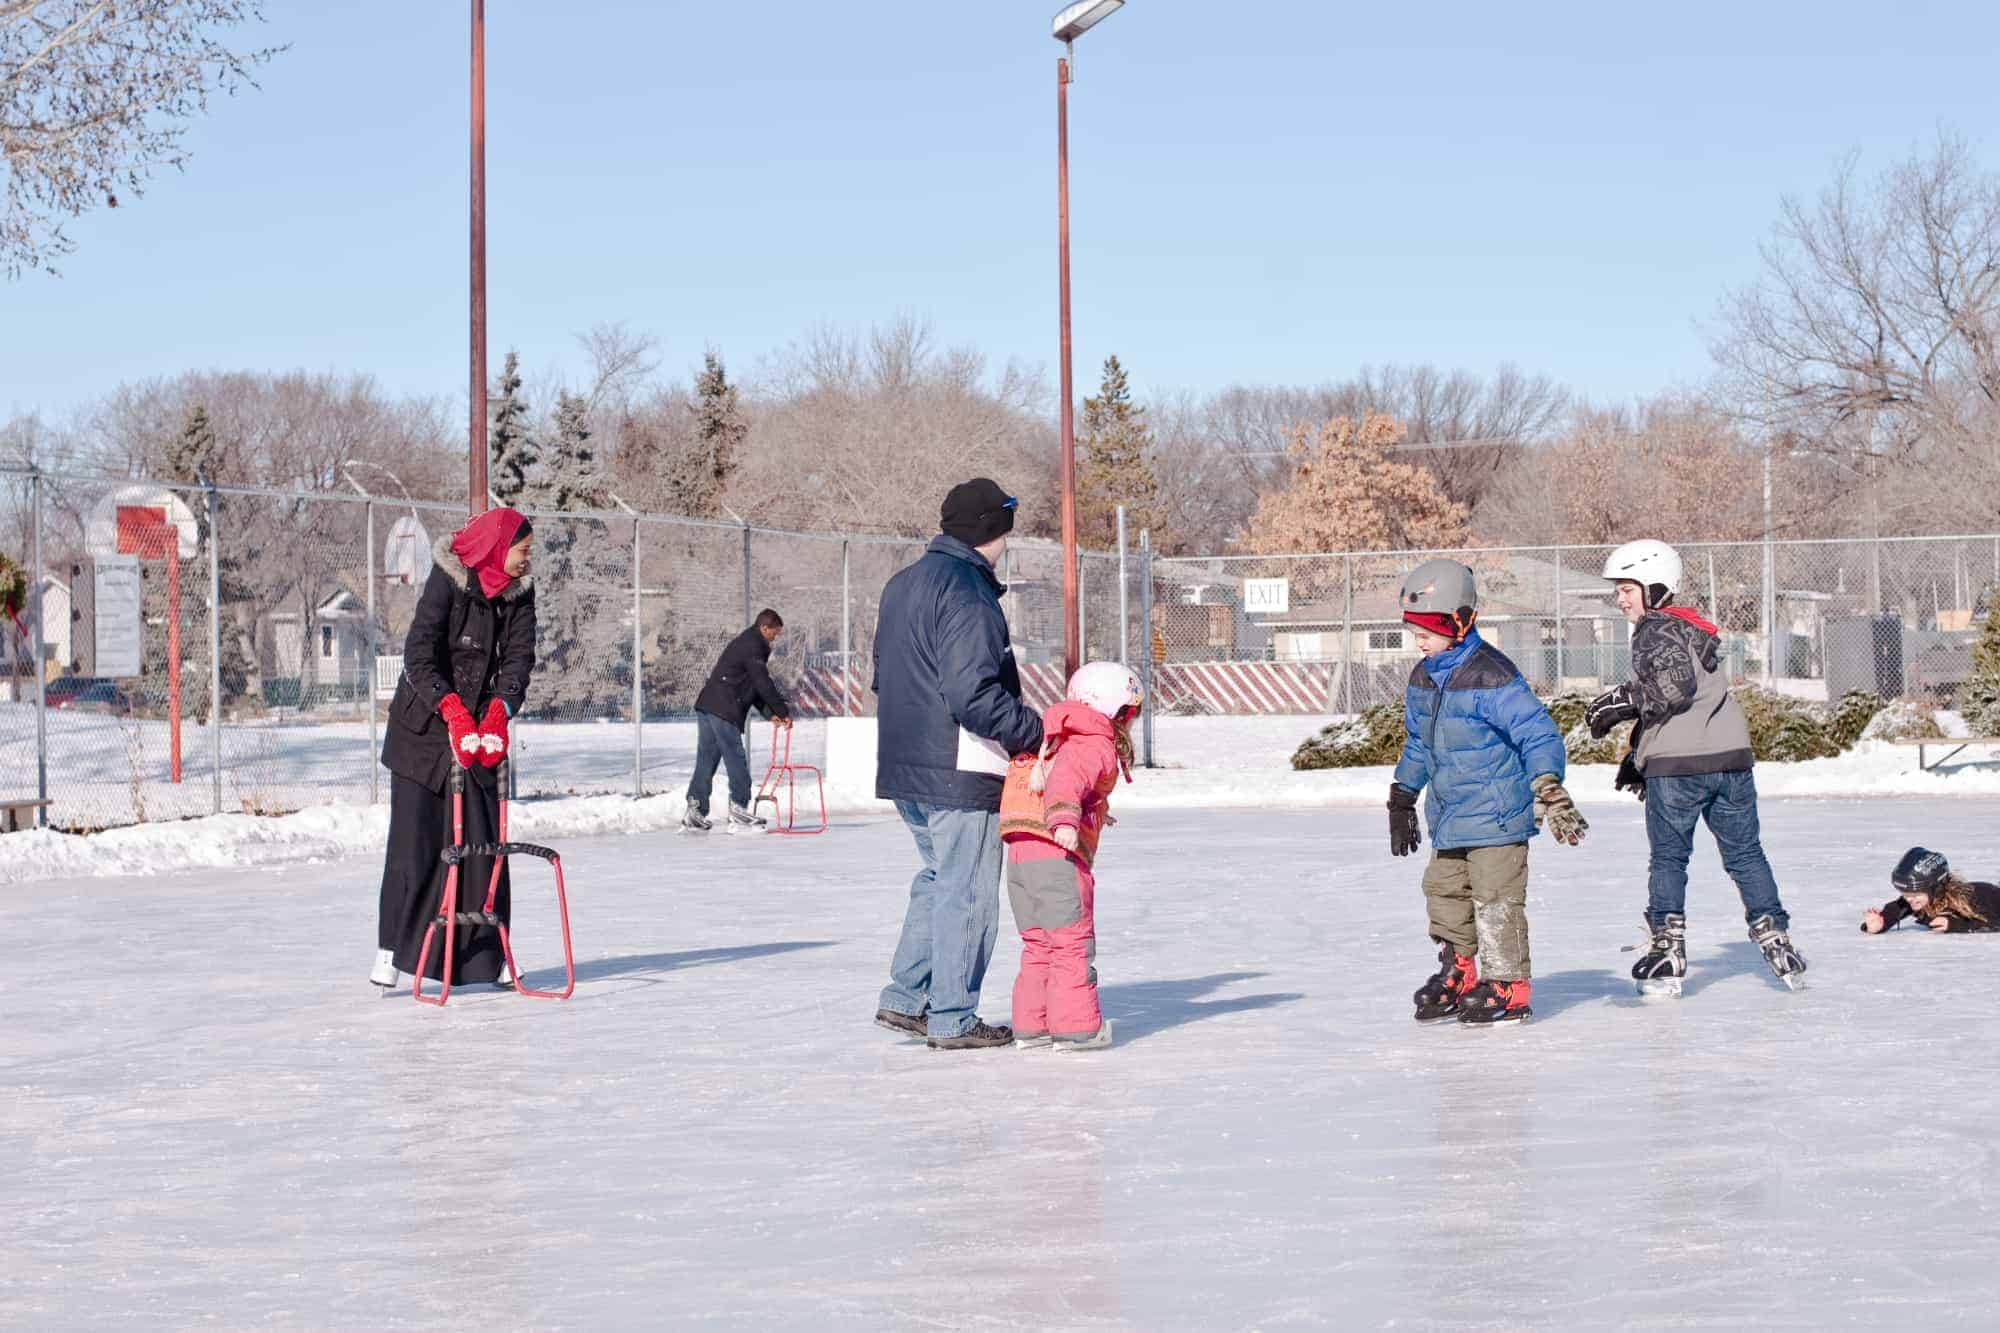 Get ready to lace up your skates this winter